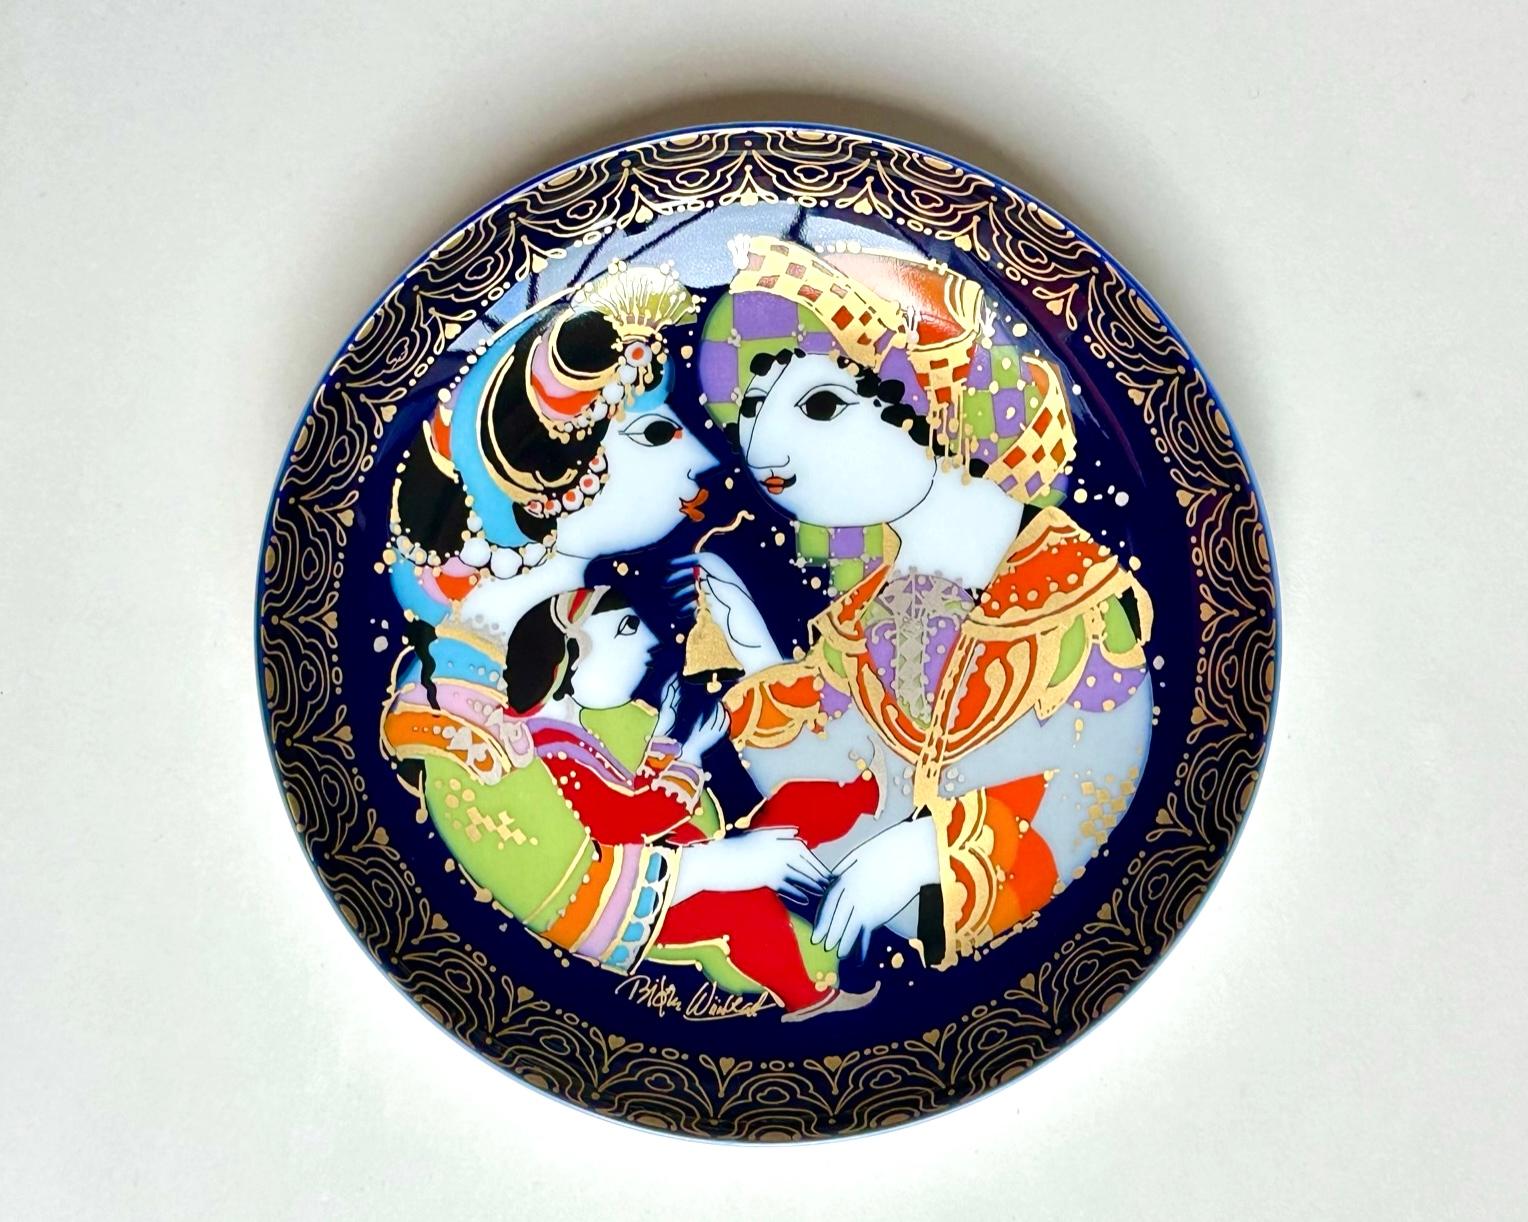 Beautiful Collectible Plates Bjorn Wiinblad, Rosenthal, Germany, 1970s In Excellent Condition For Sale In Bastogne, BE